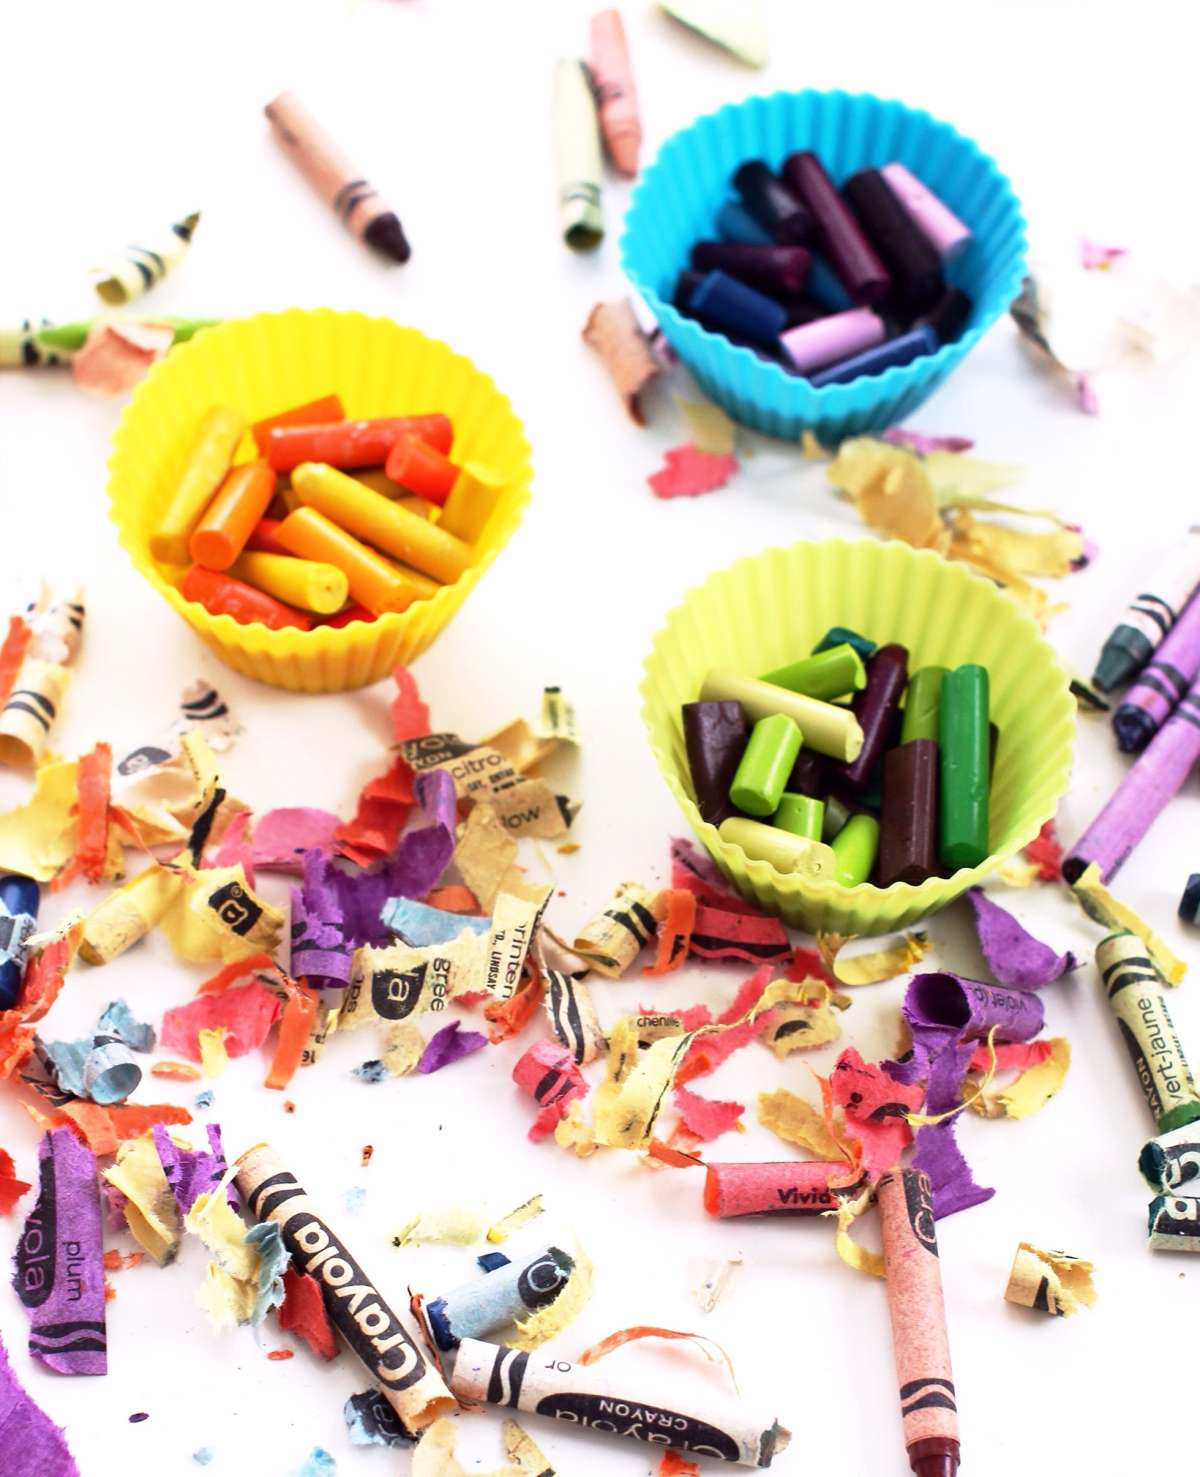 Homemade block crayons crafts for kids